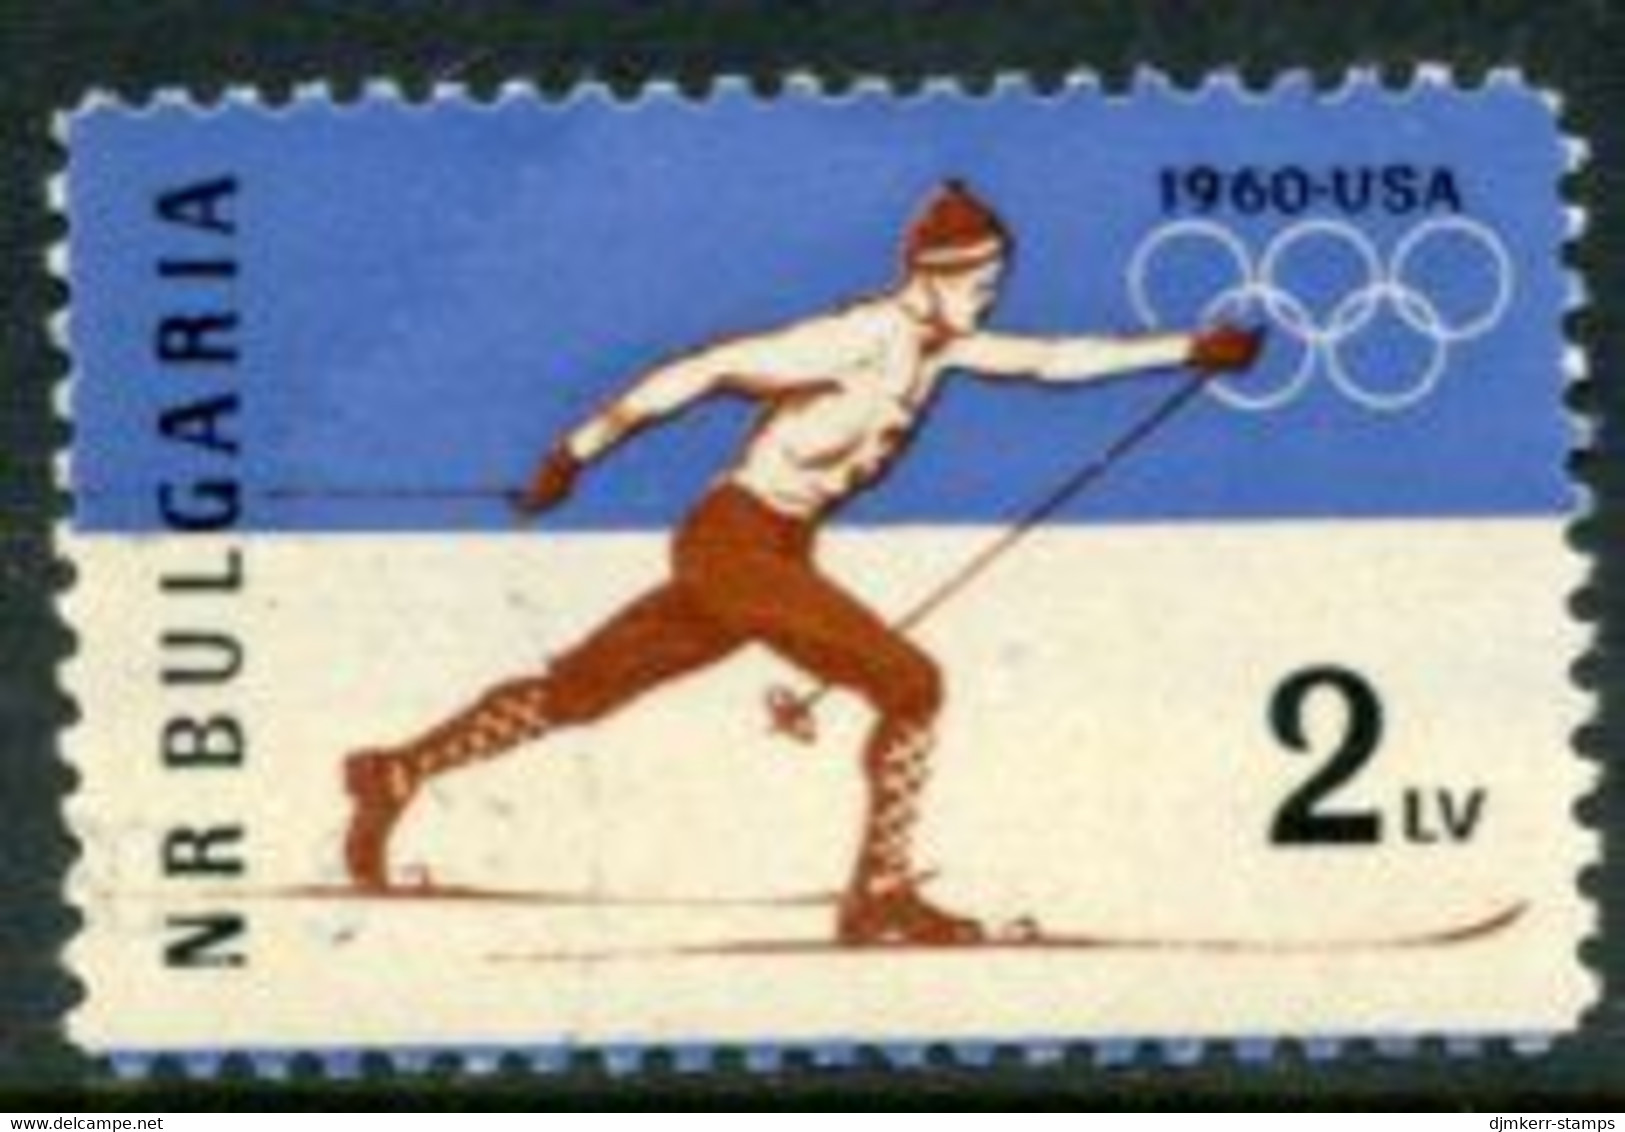 BULGARIA 1960 Winter Olympic Games Perforated MNH / **.  Michel 1153A - Ungebraucht